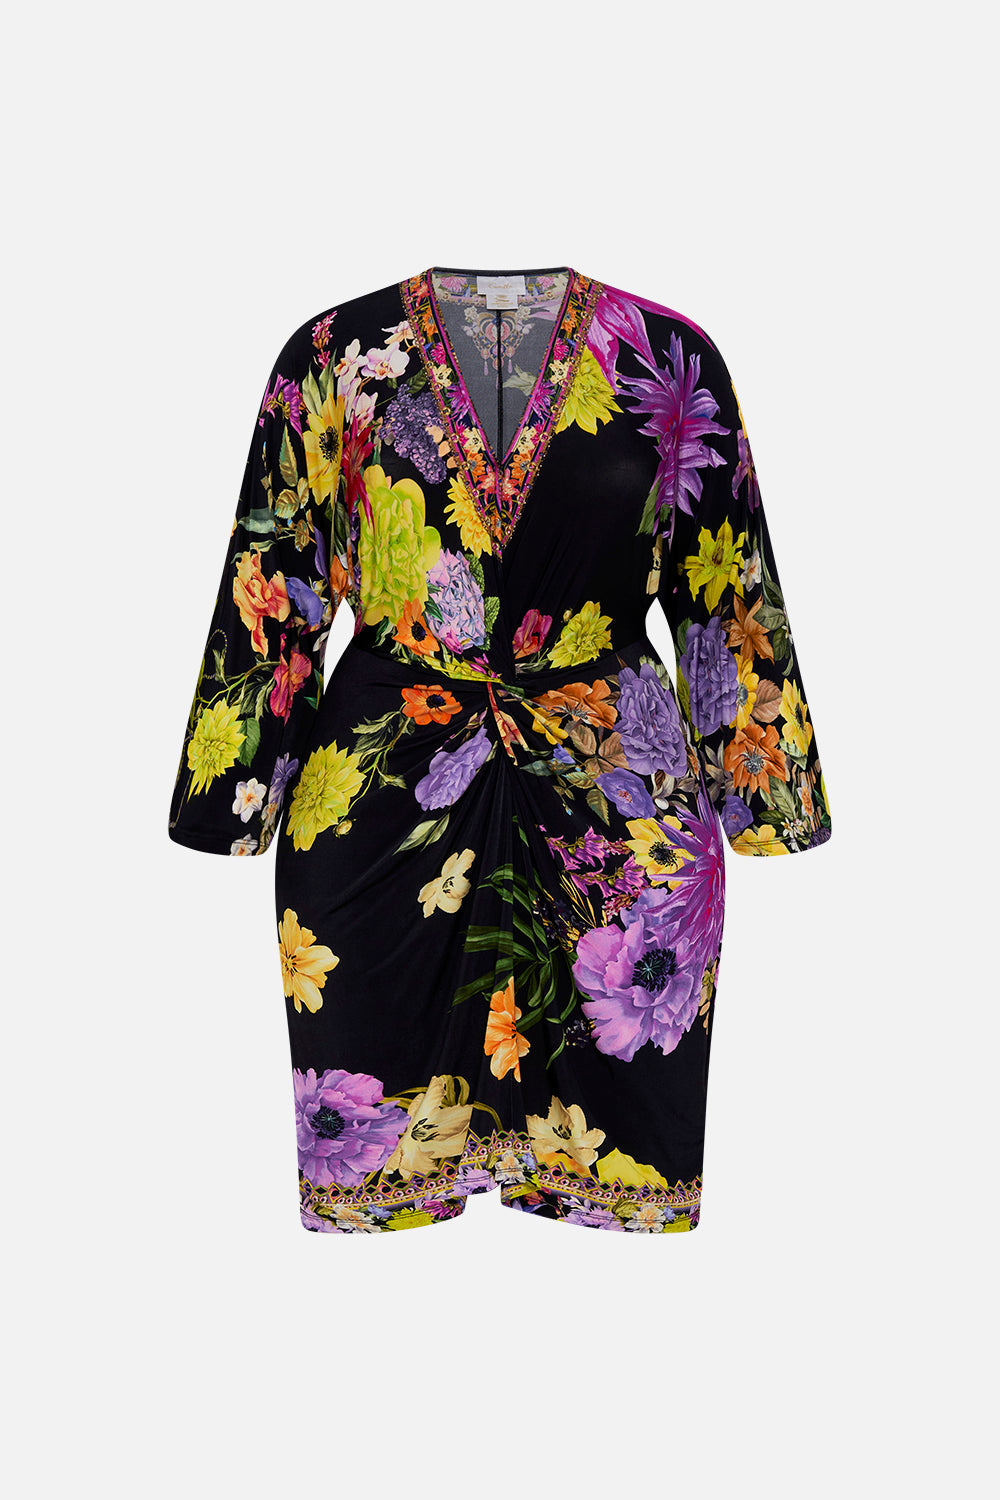 CAMILLA plus size floral dress in Peace Be With You  print